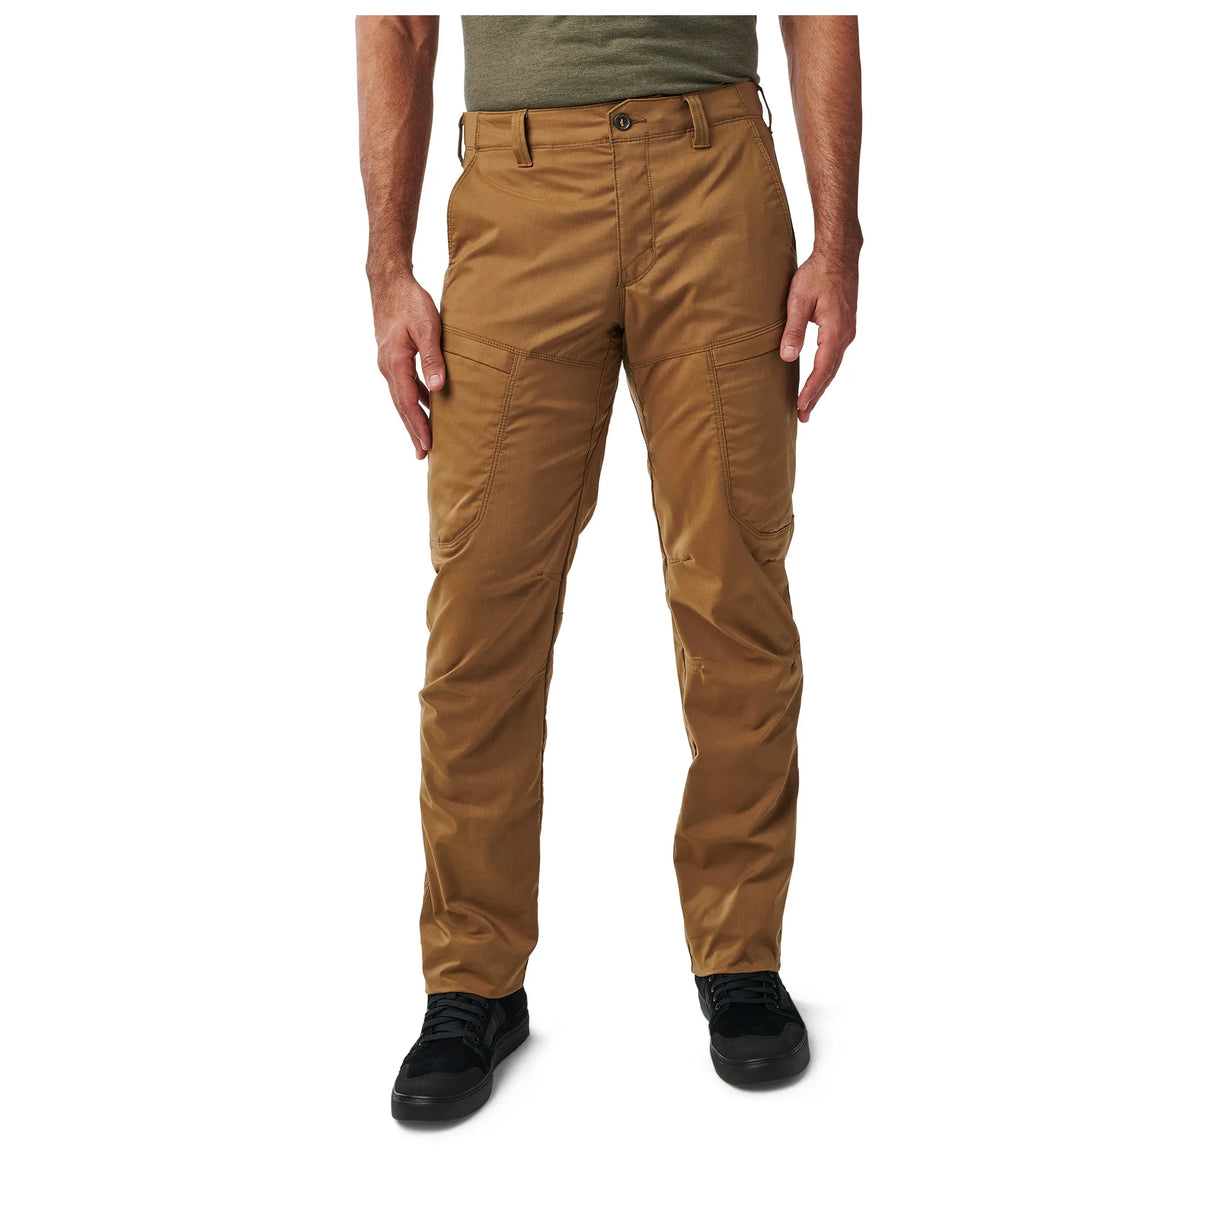 DWR Finish Tactical Pants: Repels water to keep you dry in changing weather conditions.